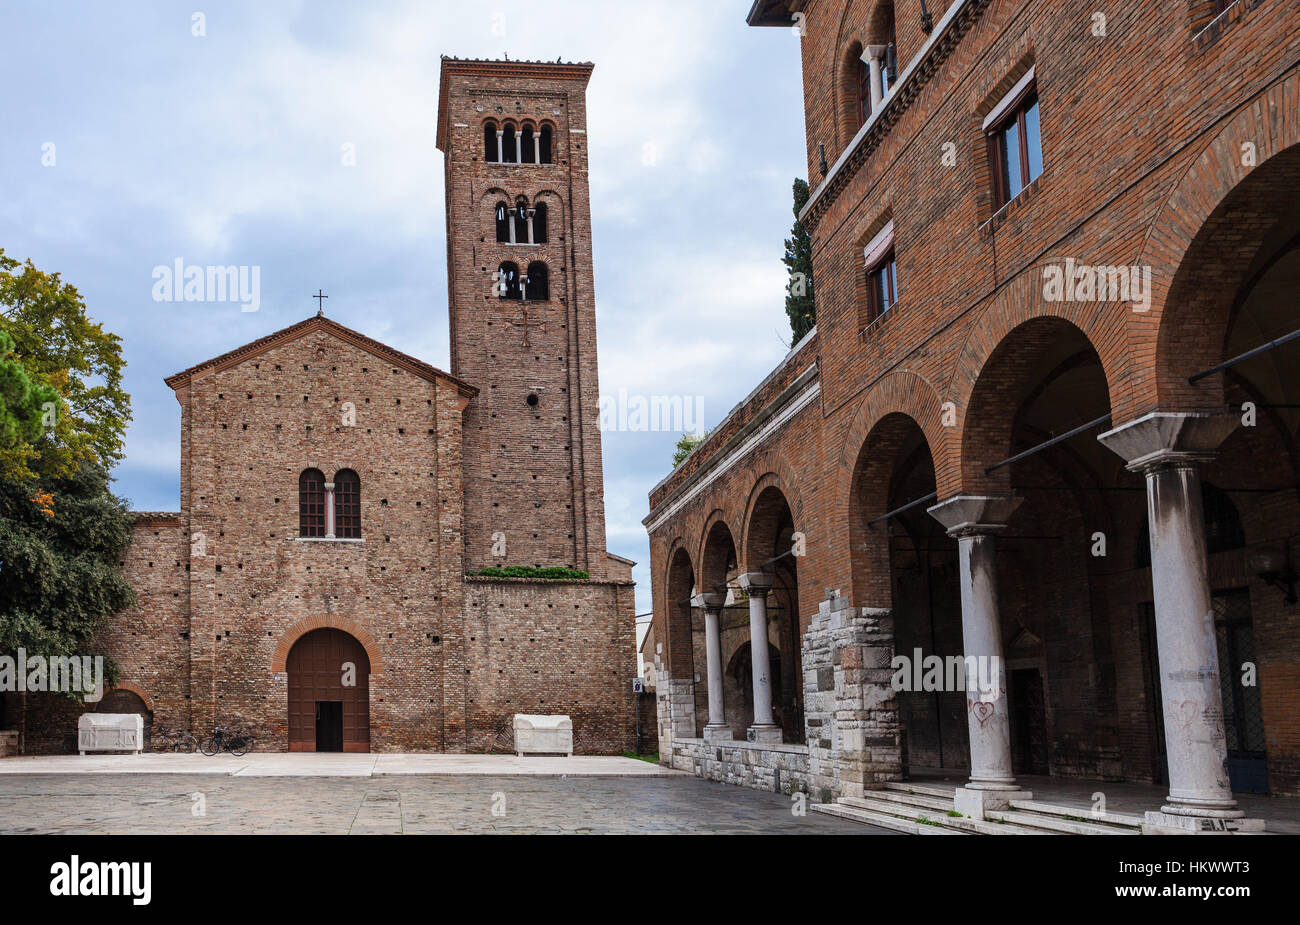 travel to Italy - front view of St Francis Basilica (Basilica of San Francesco) in Ravenna city Stock Photo